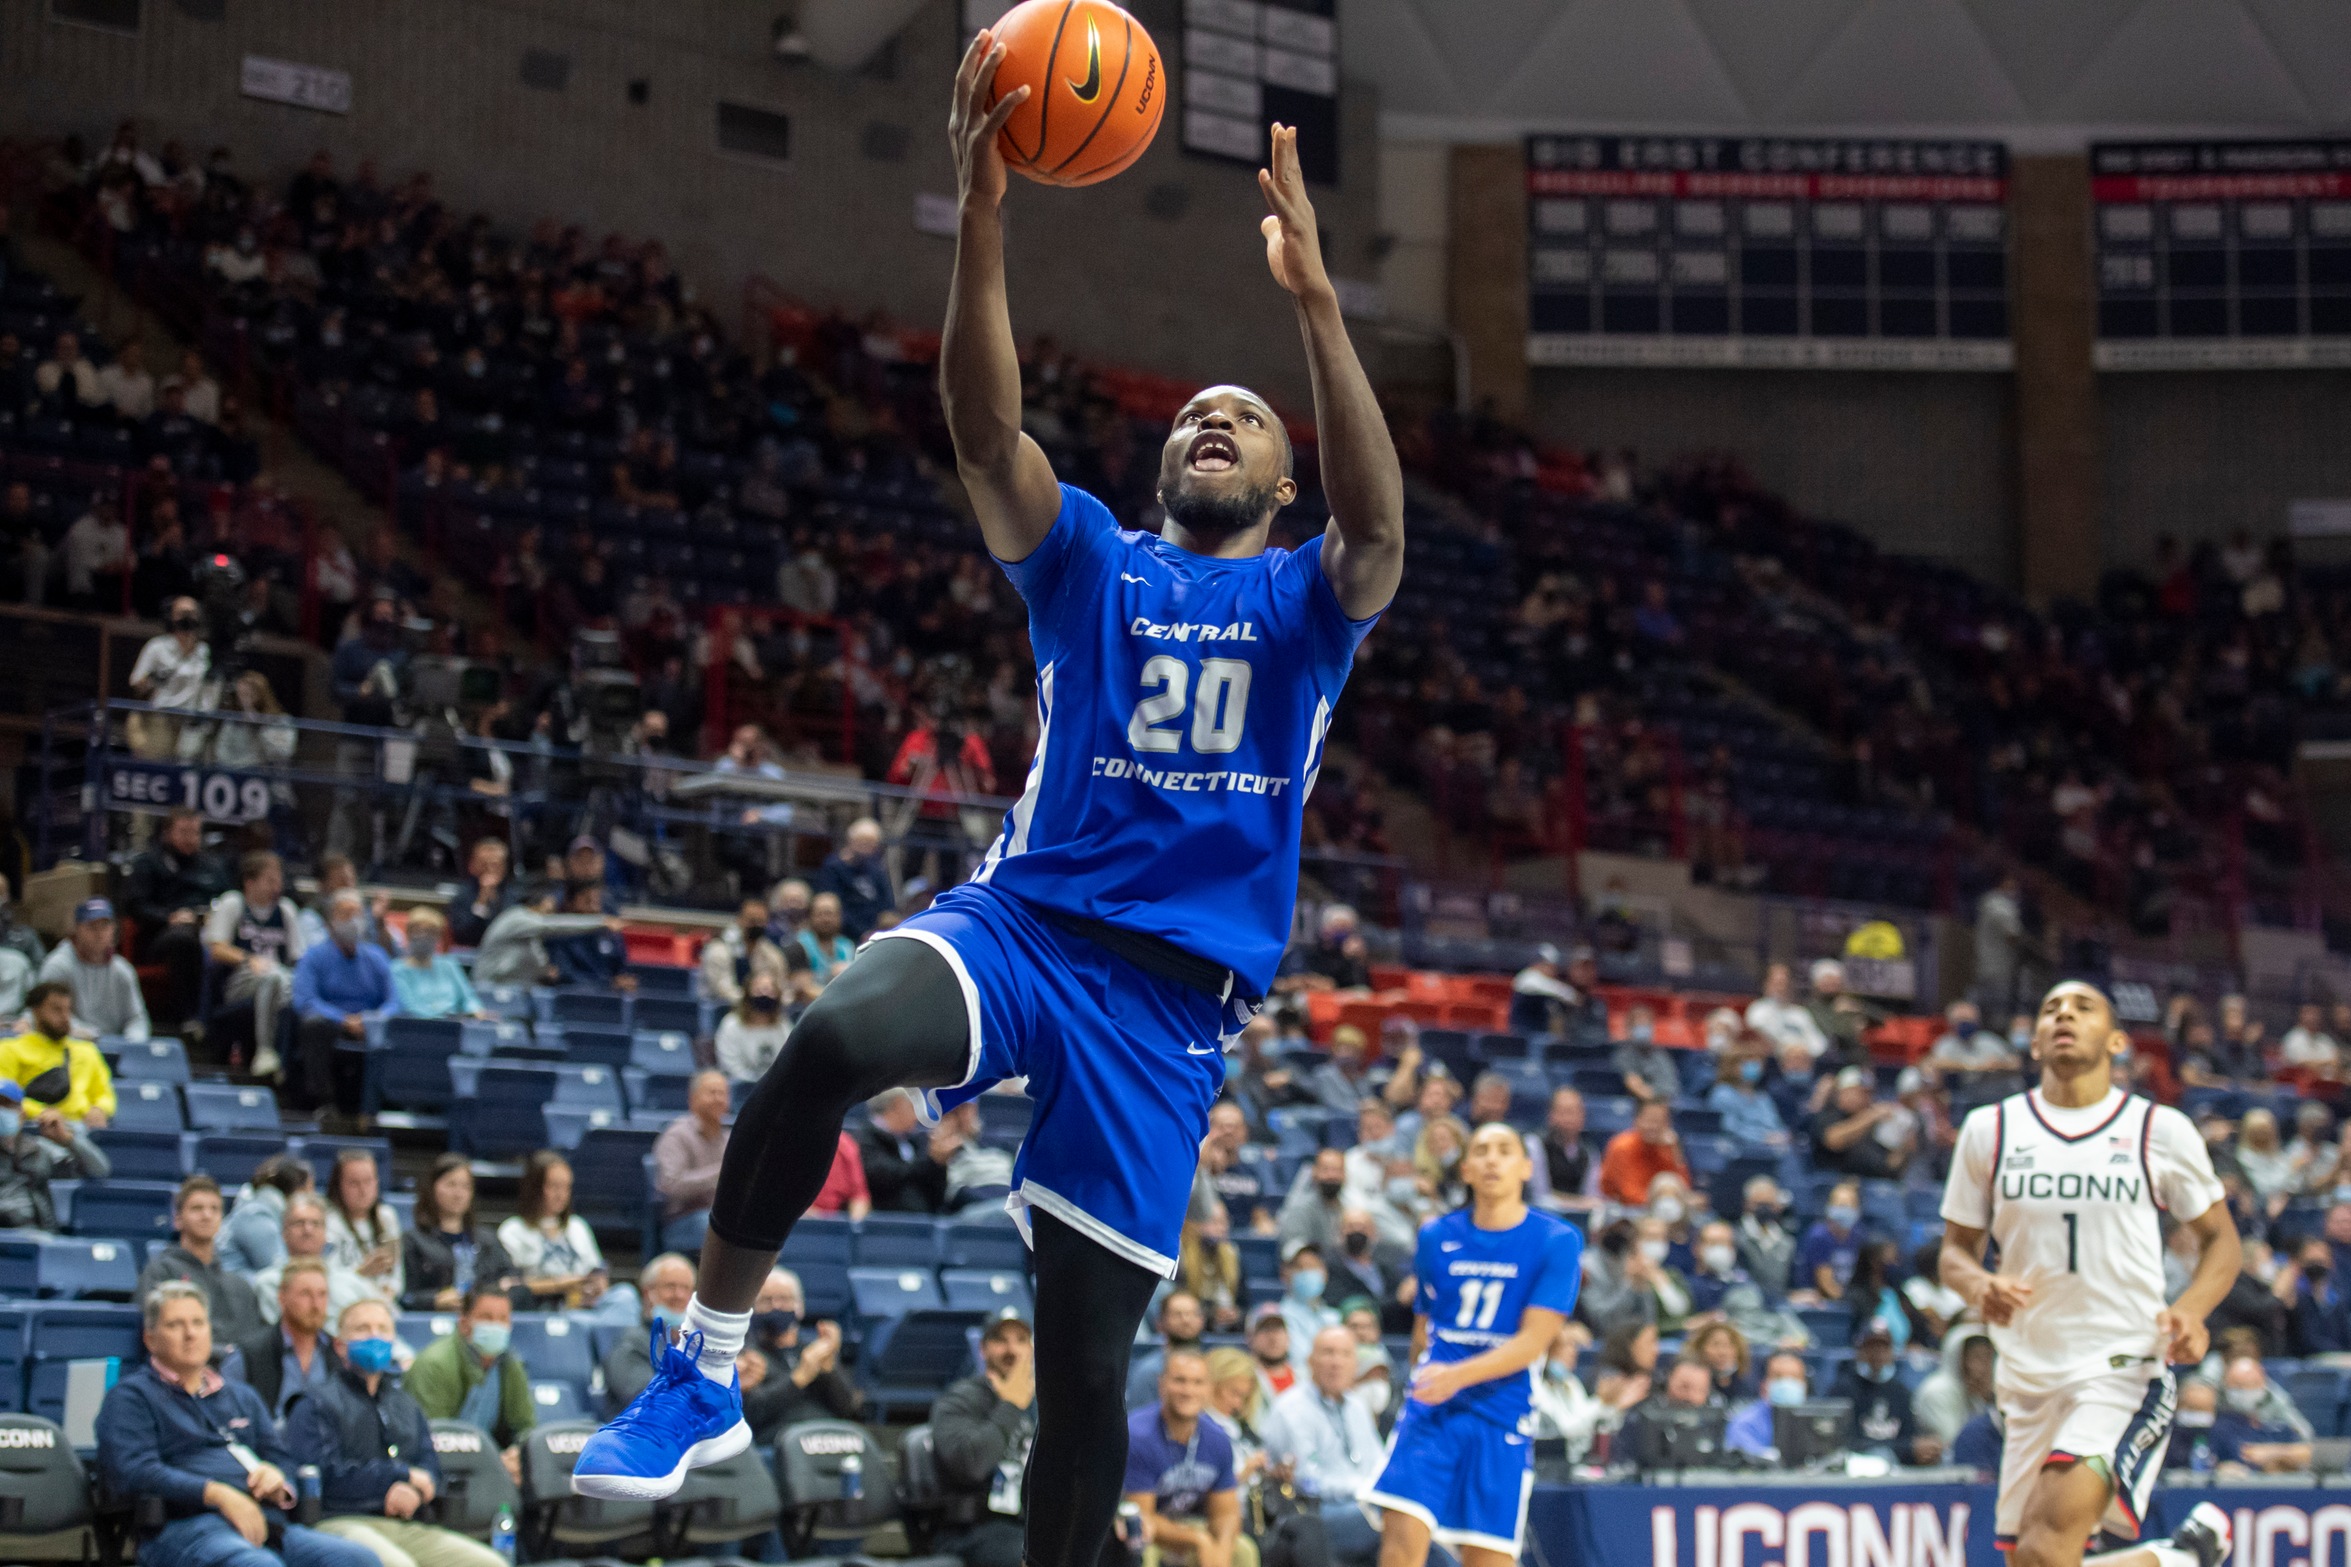 Men's Hoops Plays Third Game in Four Days, Falls at Rutgers